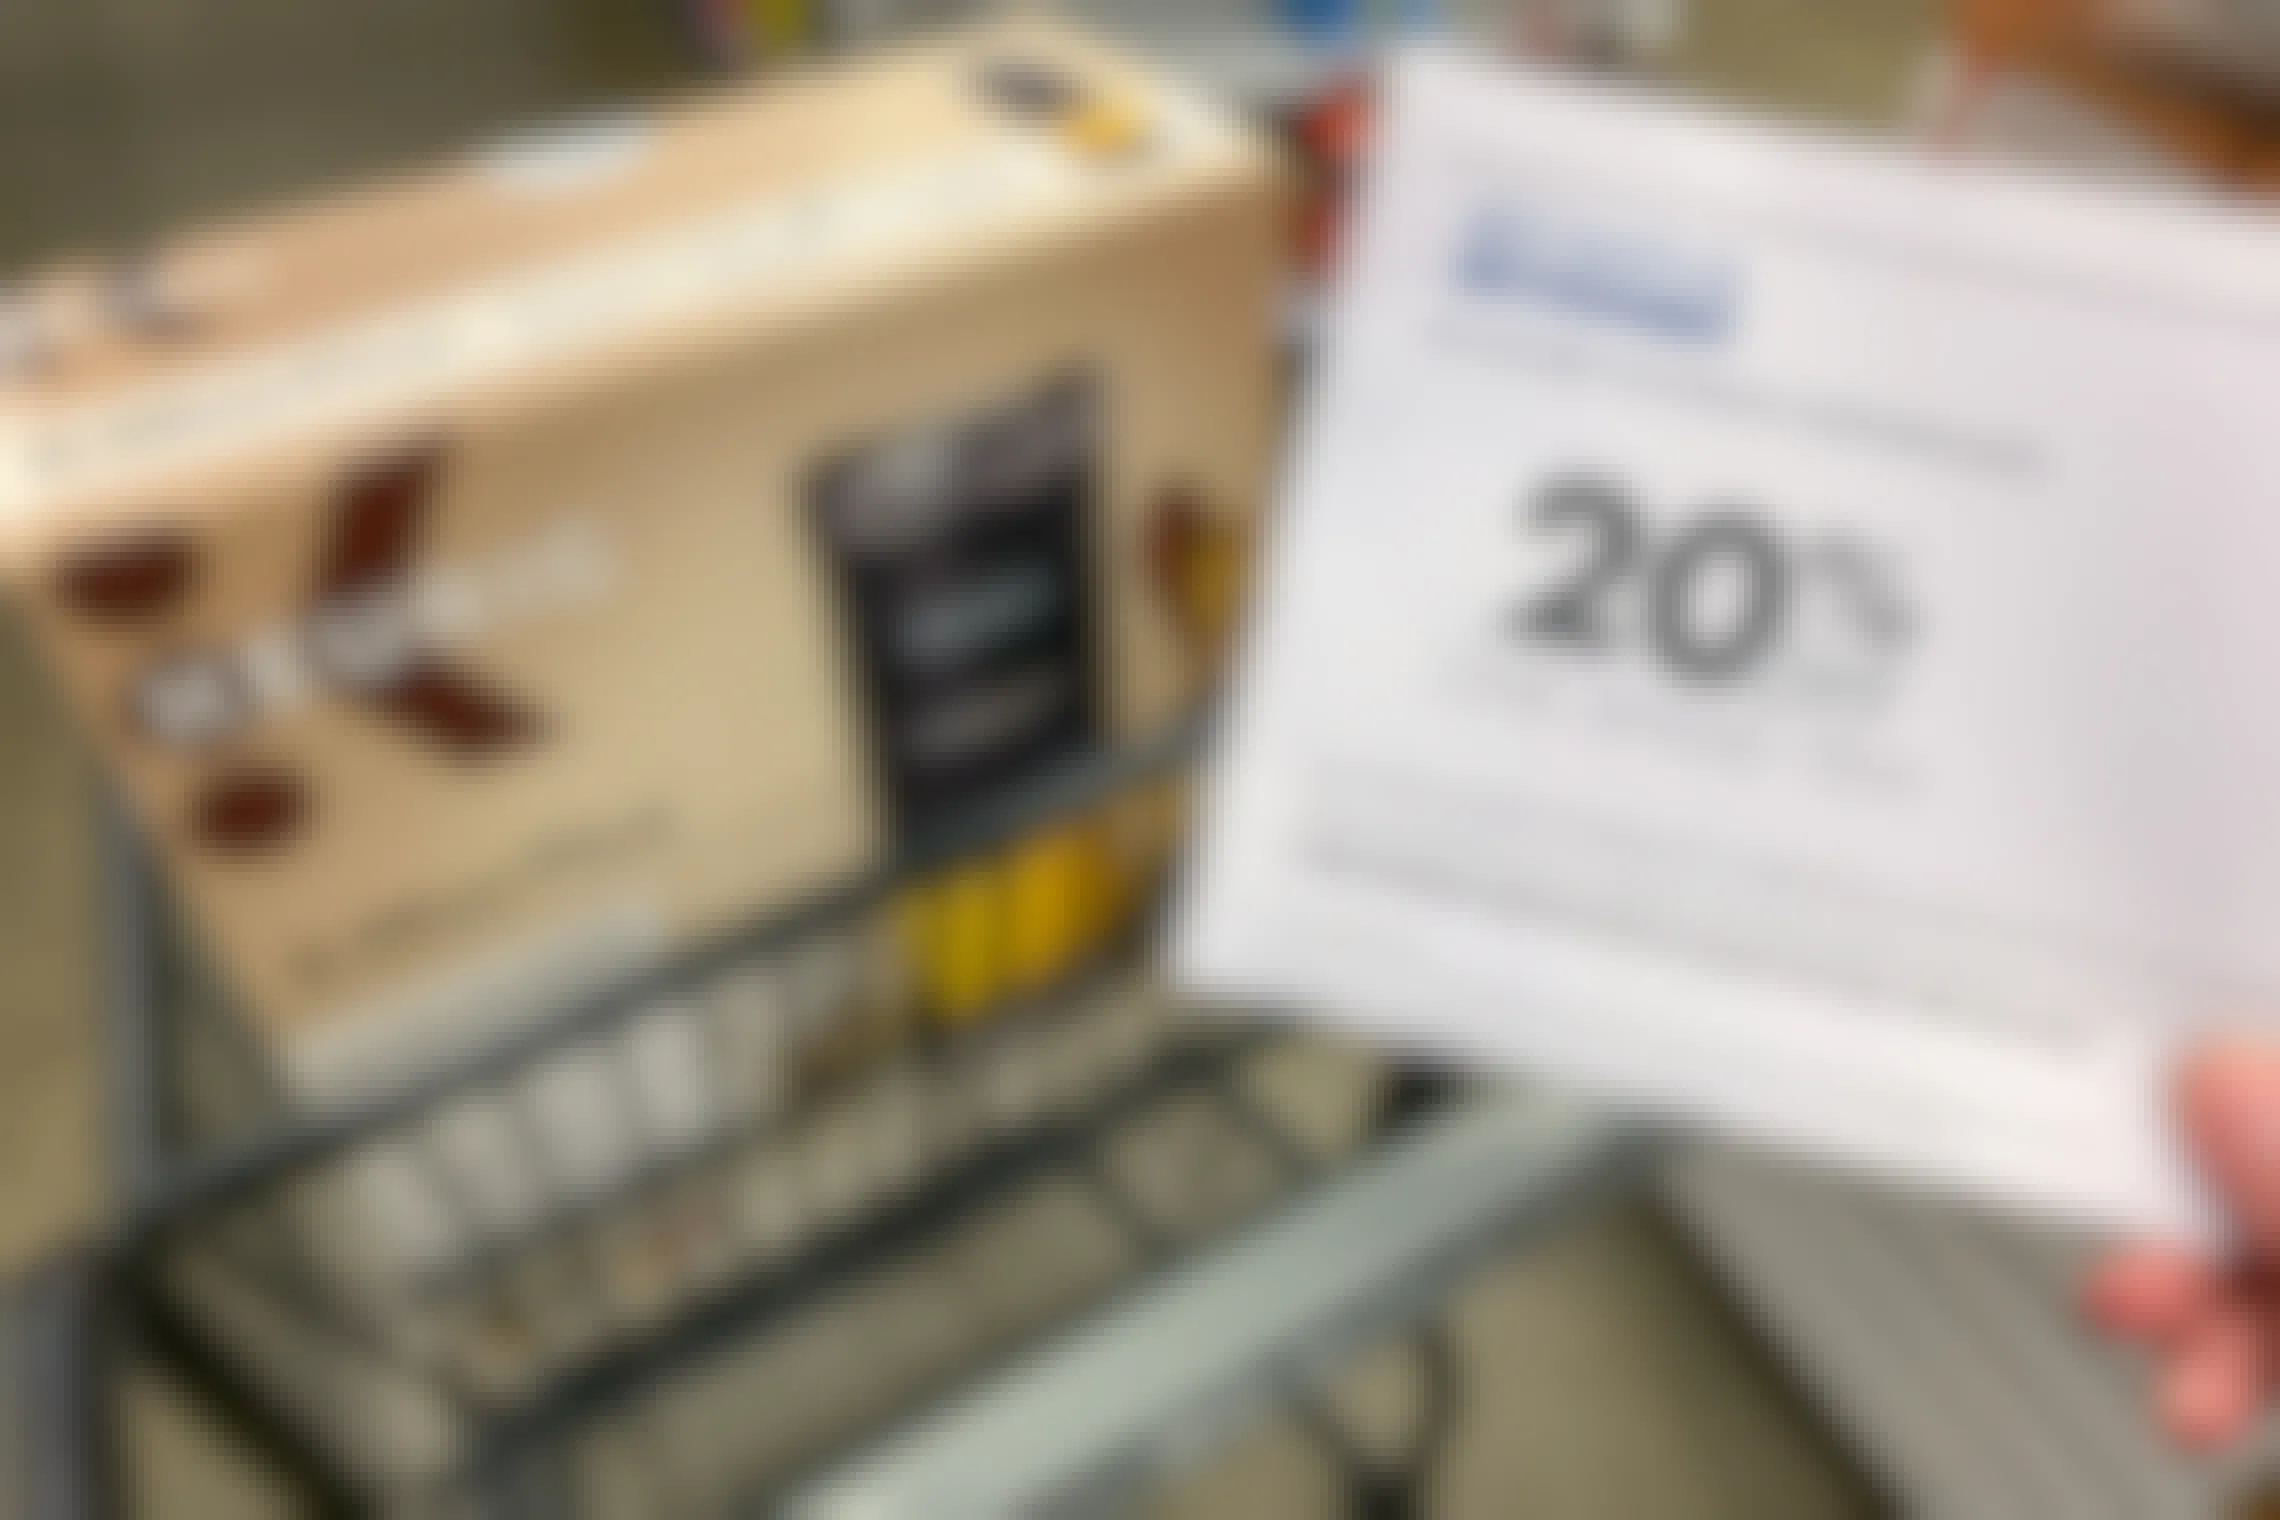 20% off Bed Bath and Beyond coupon held near a Keurig coffee maker in store